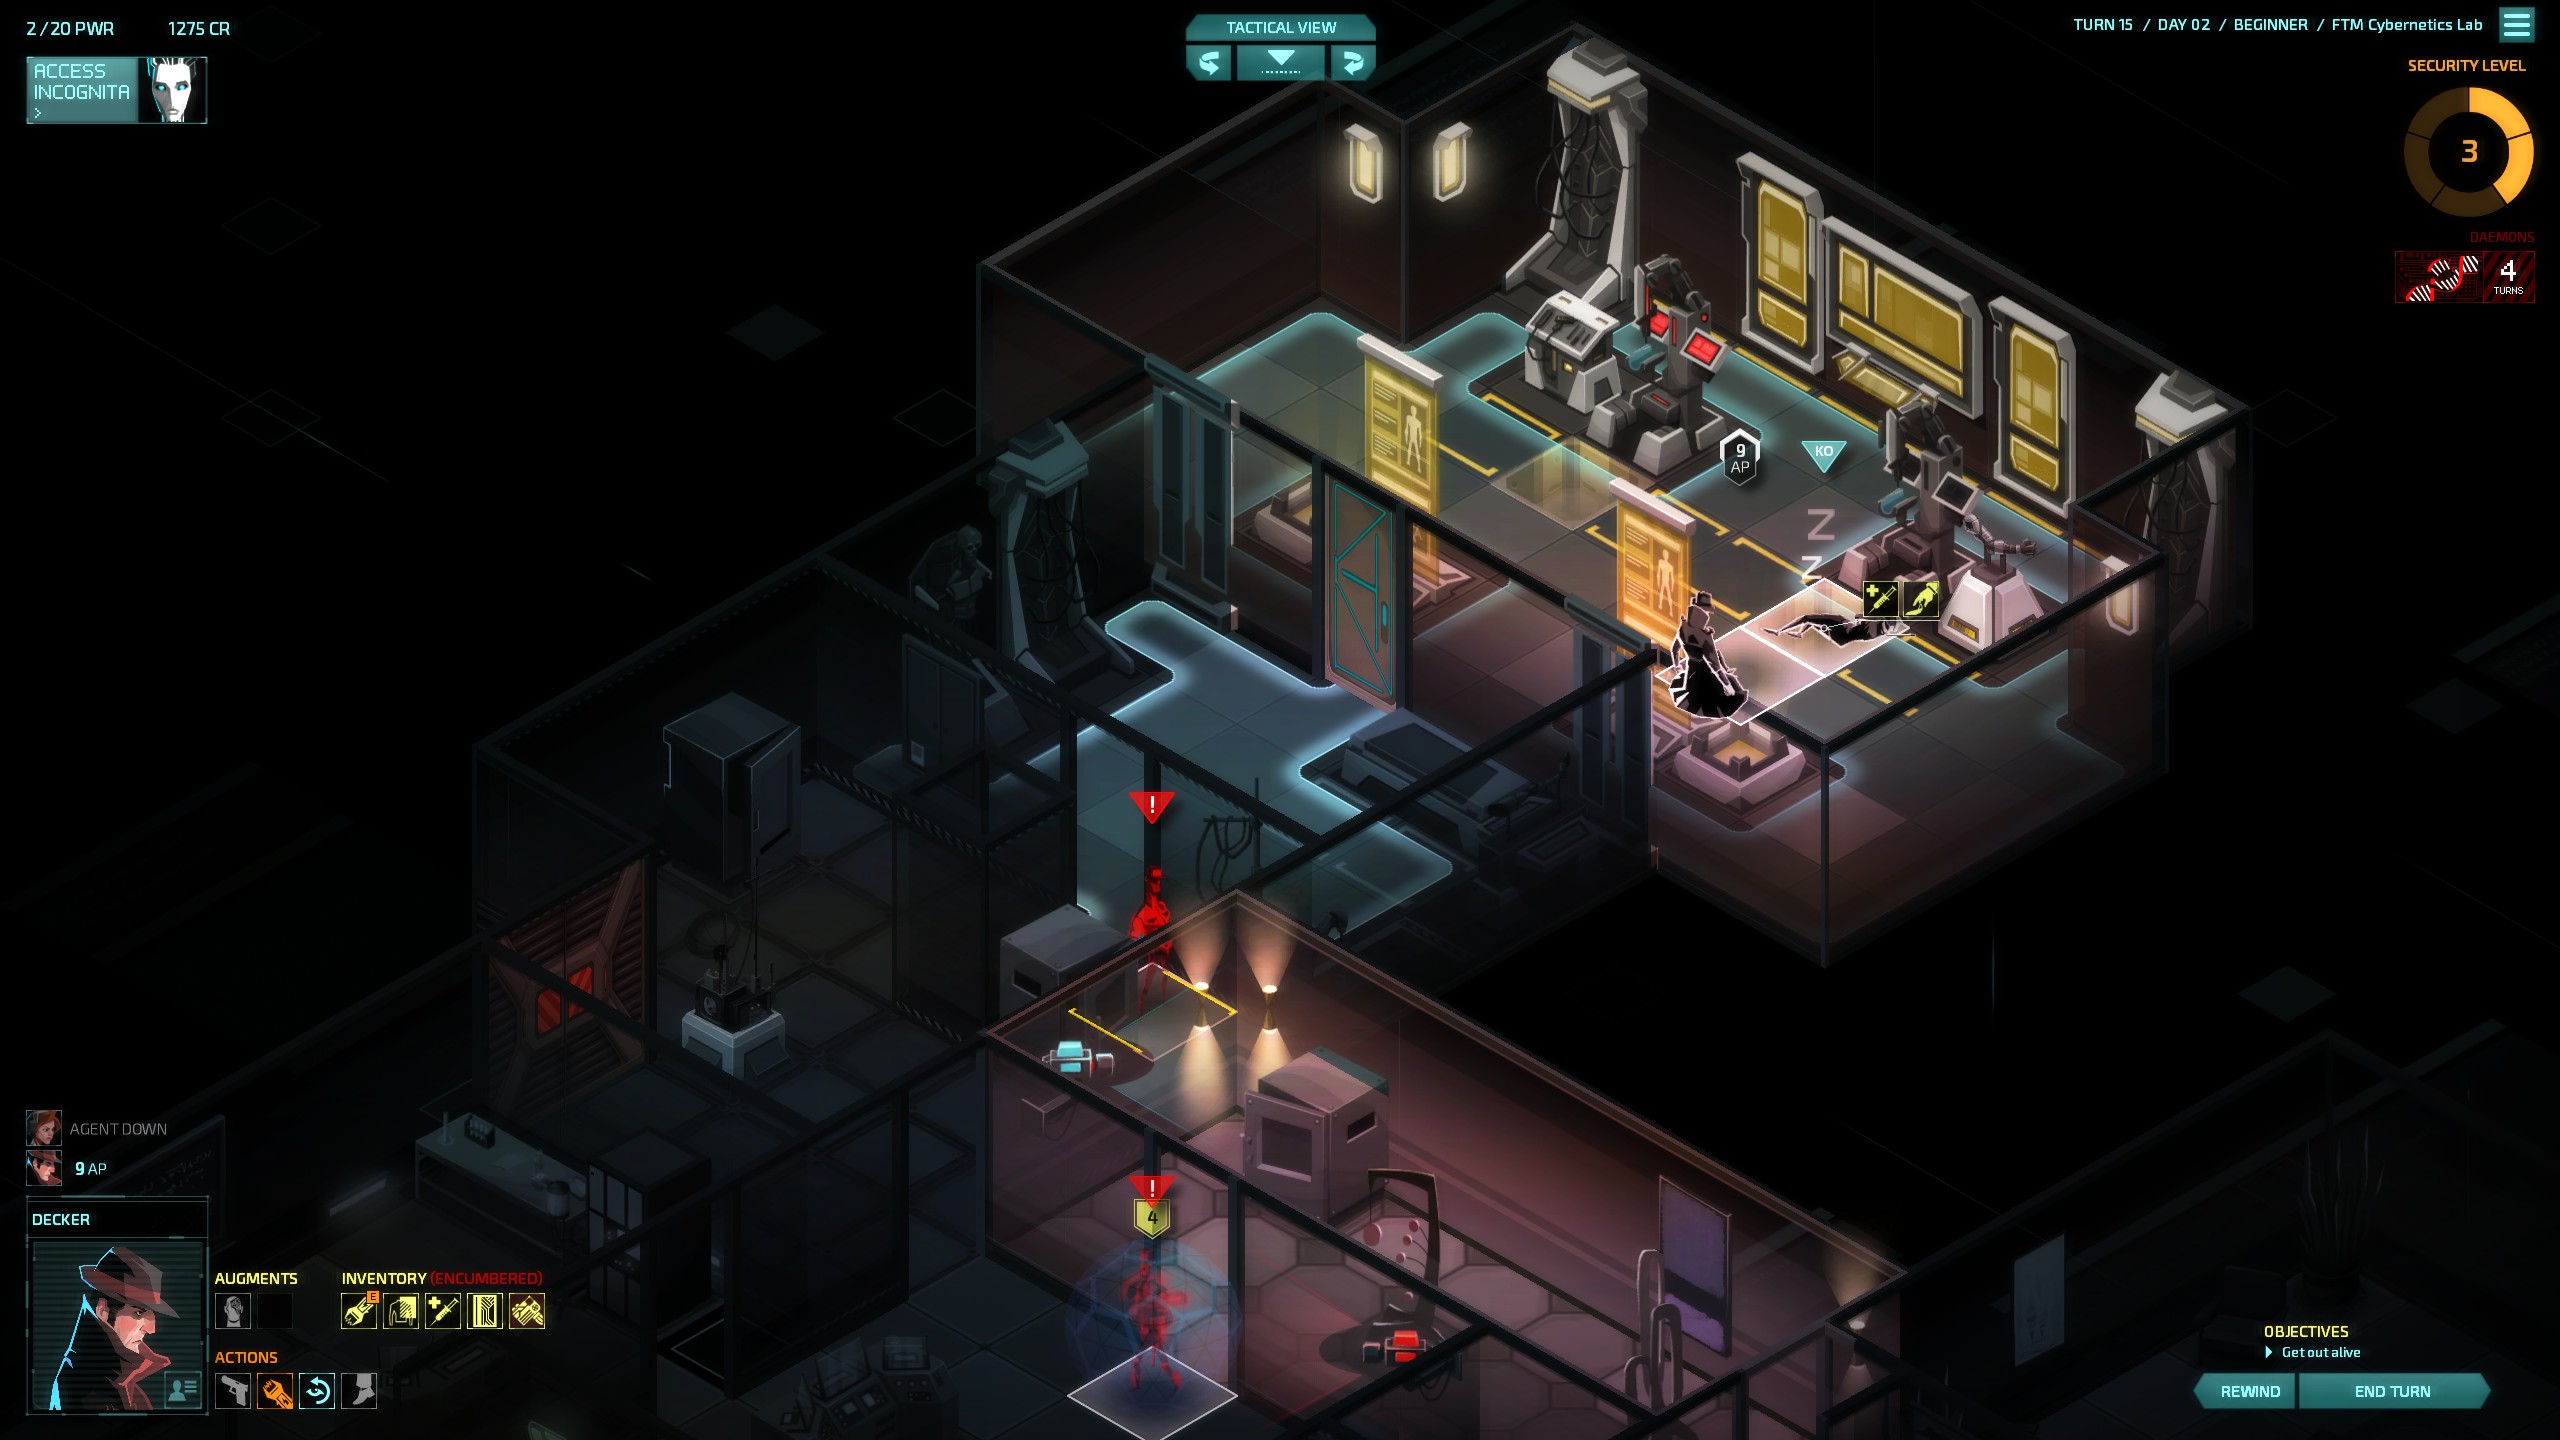 A downed agent in a cybernetic lab, with guards outside